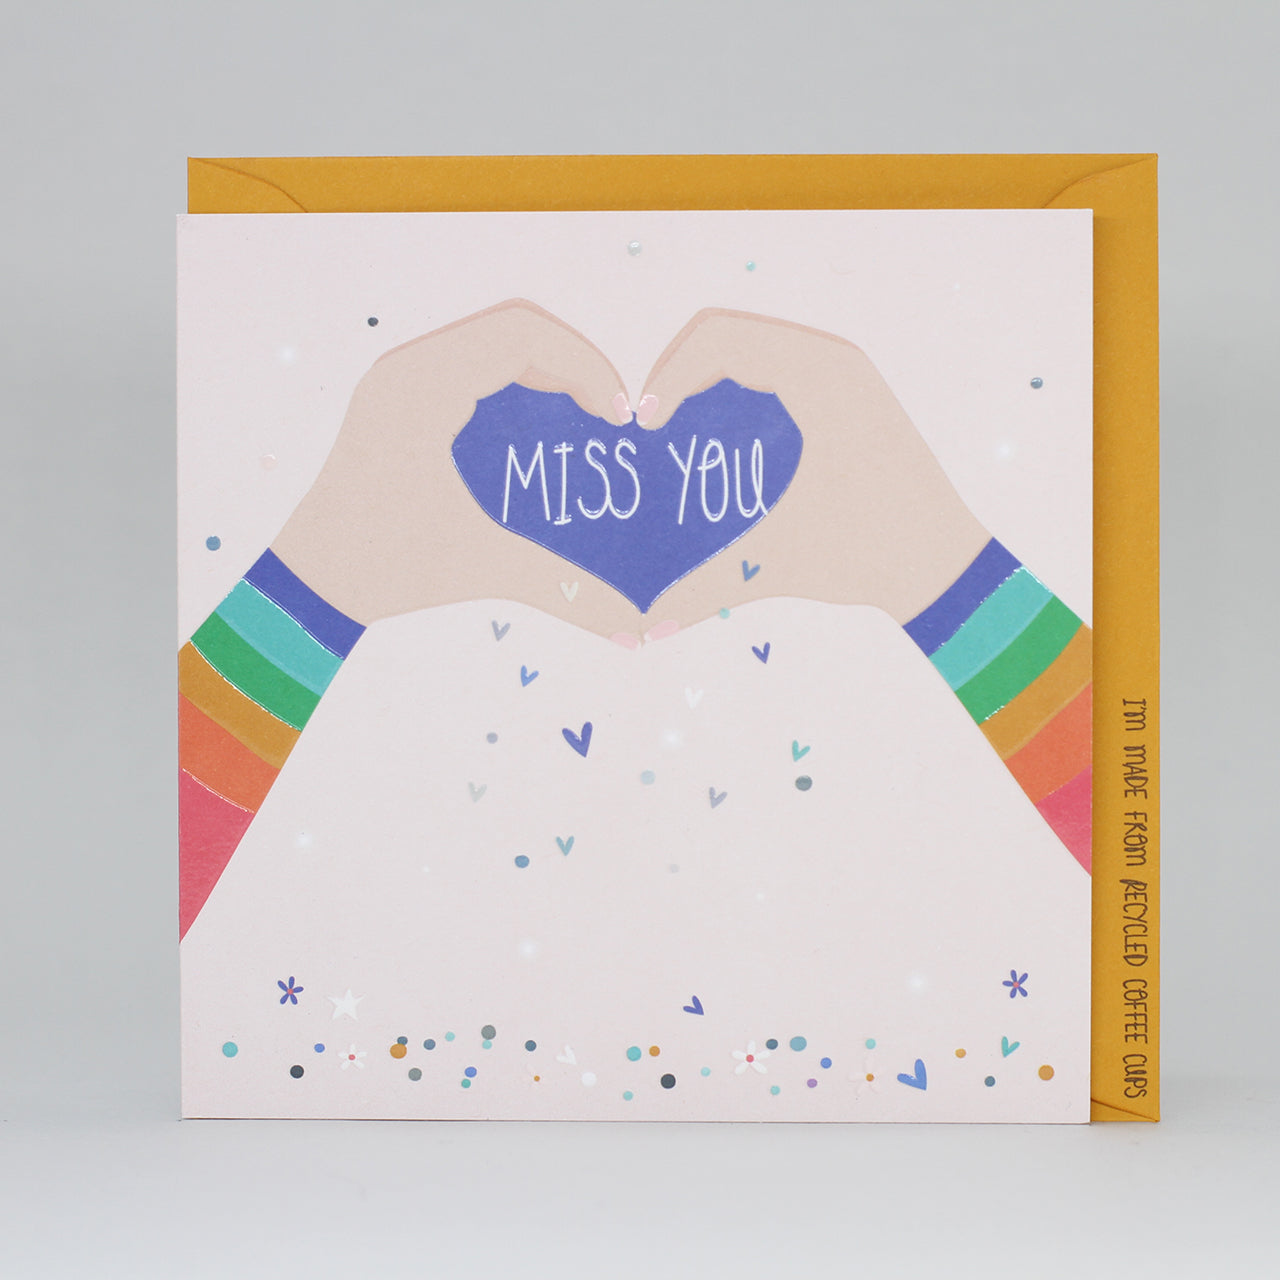 Miss you greetings card - Belly Button Designs